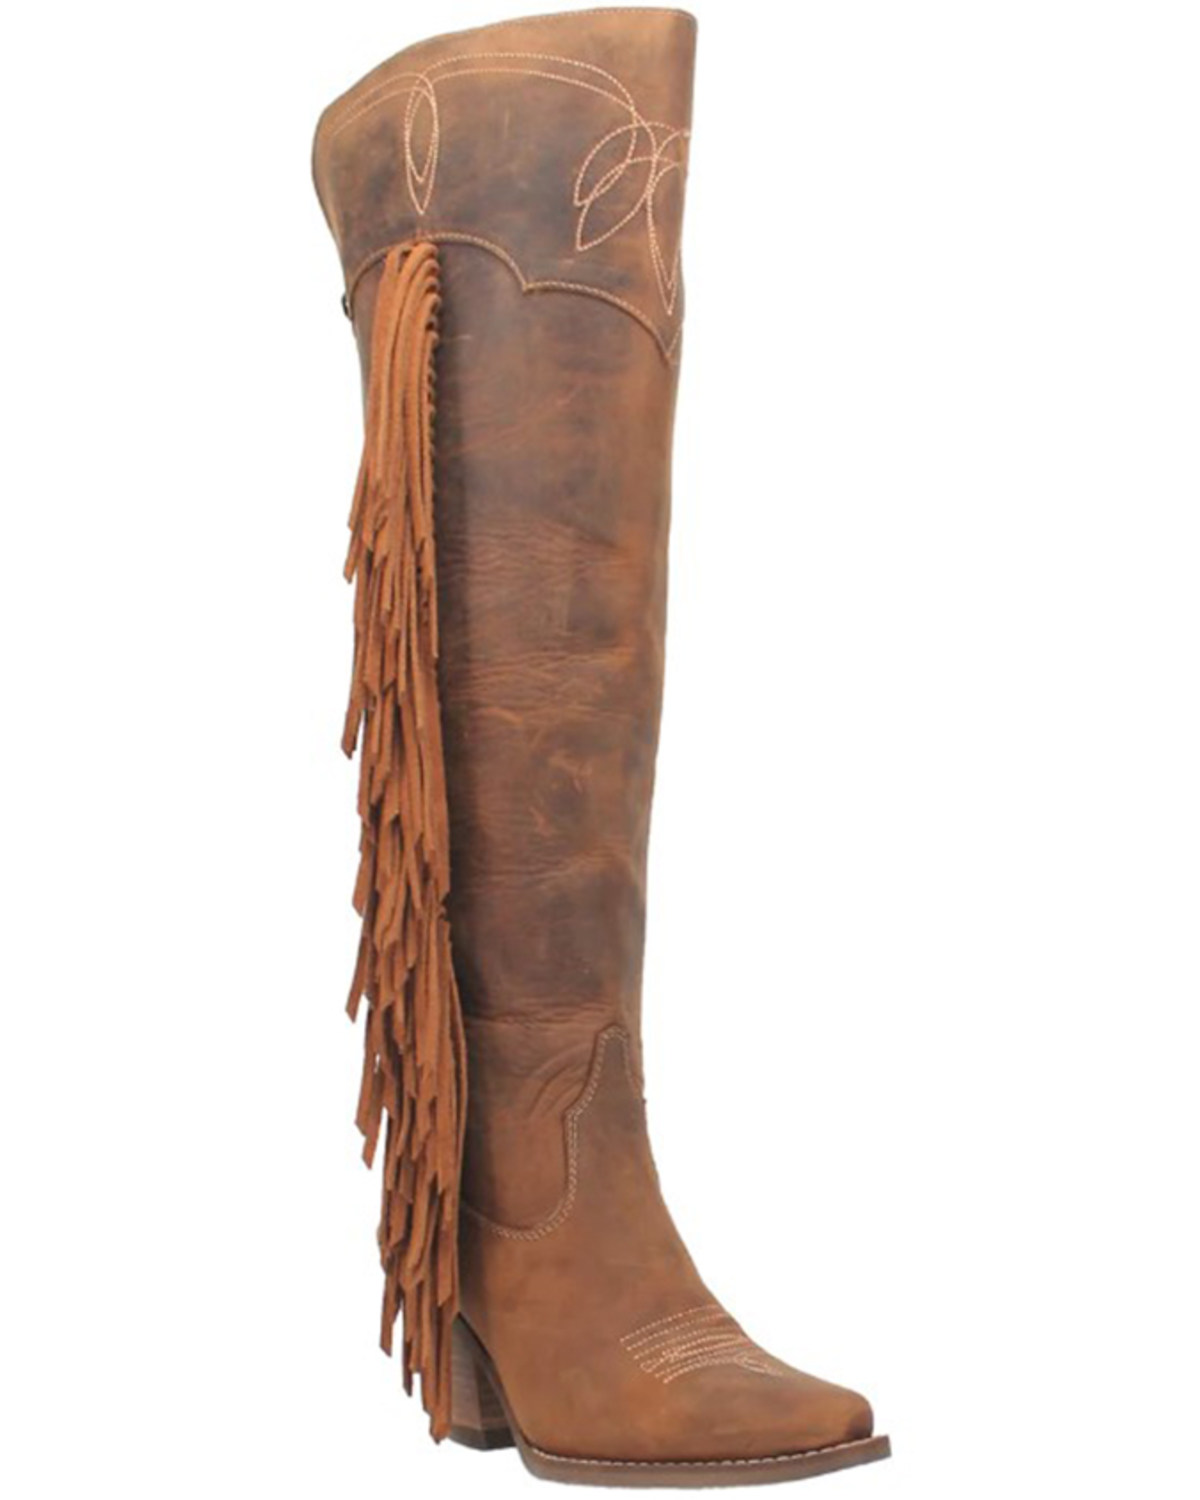 Dingo Women's Sky High Tall Western Boots - Pointed Toe